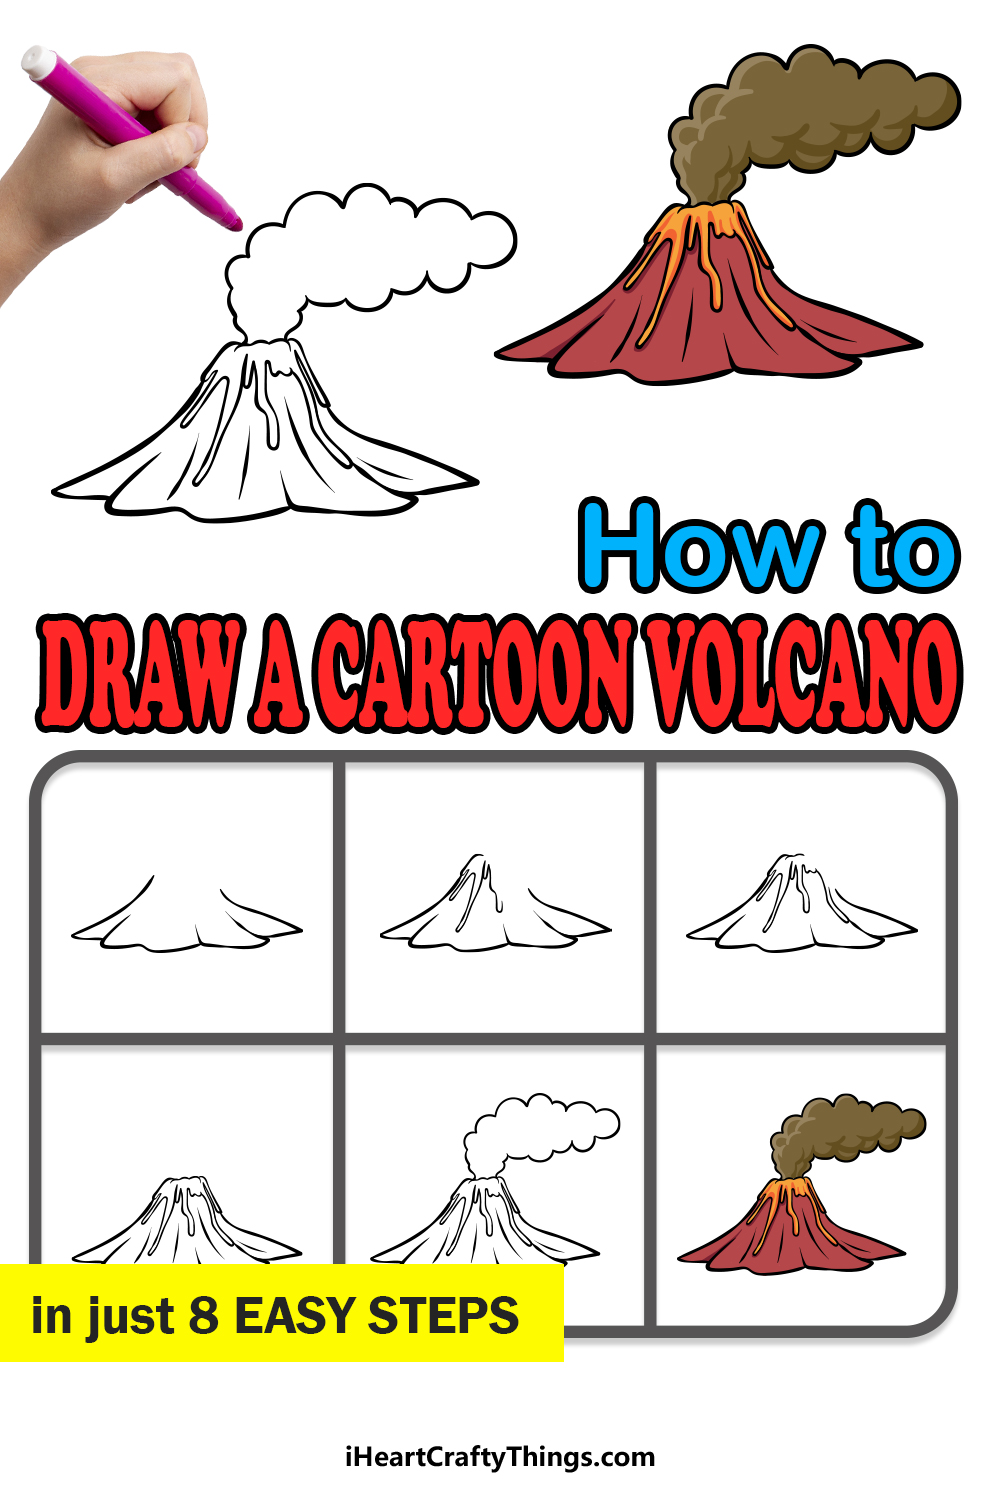 how to draw a cartoon volcano in 8 easy steps